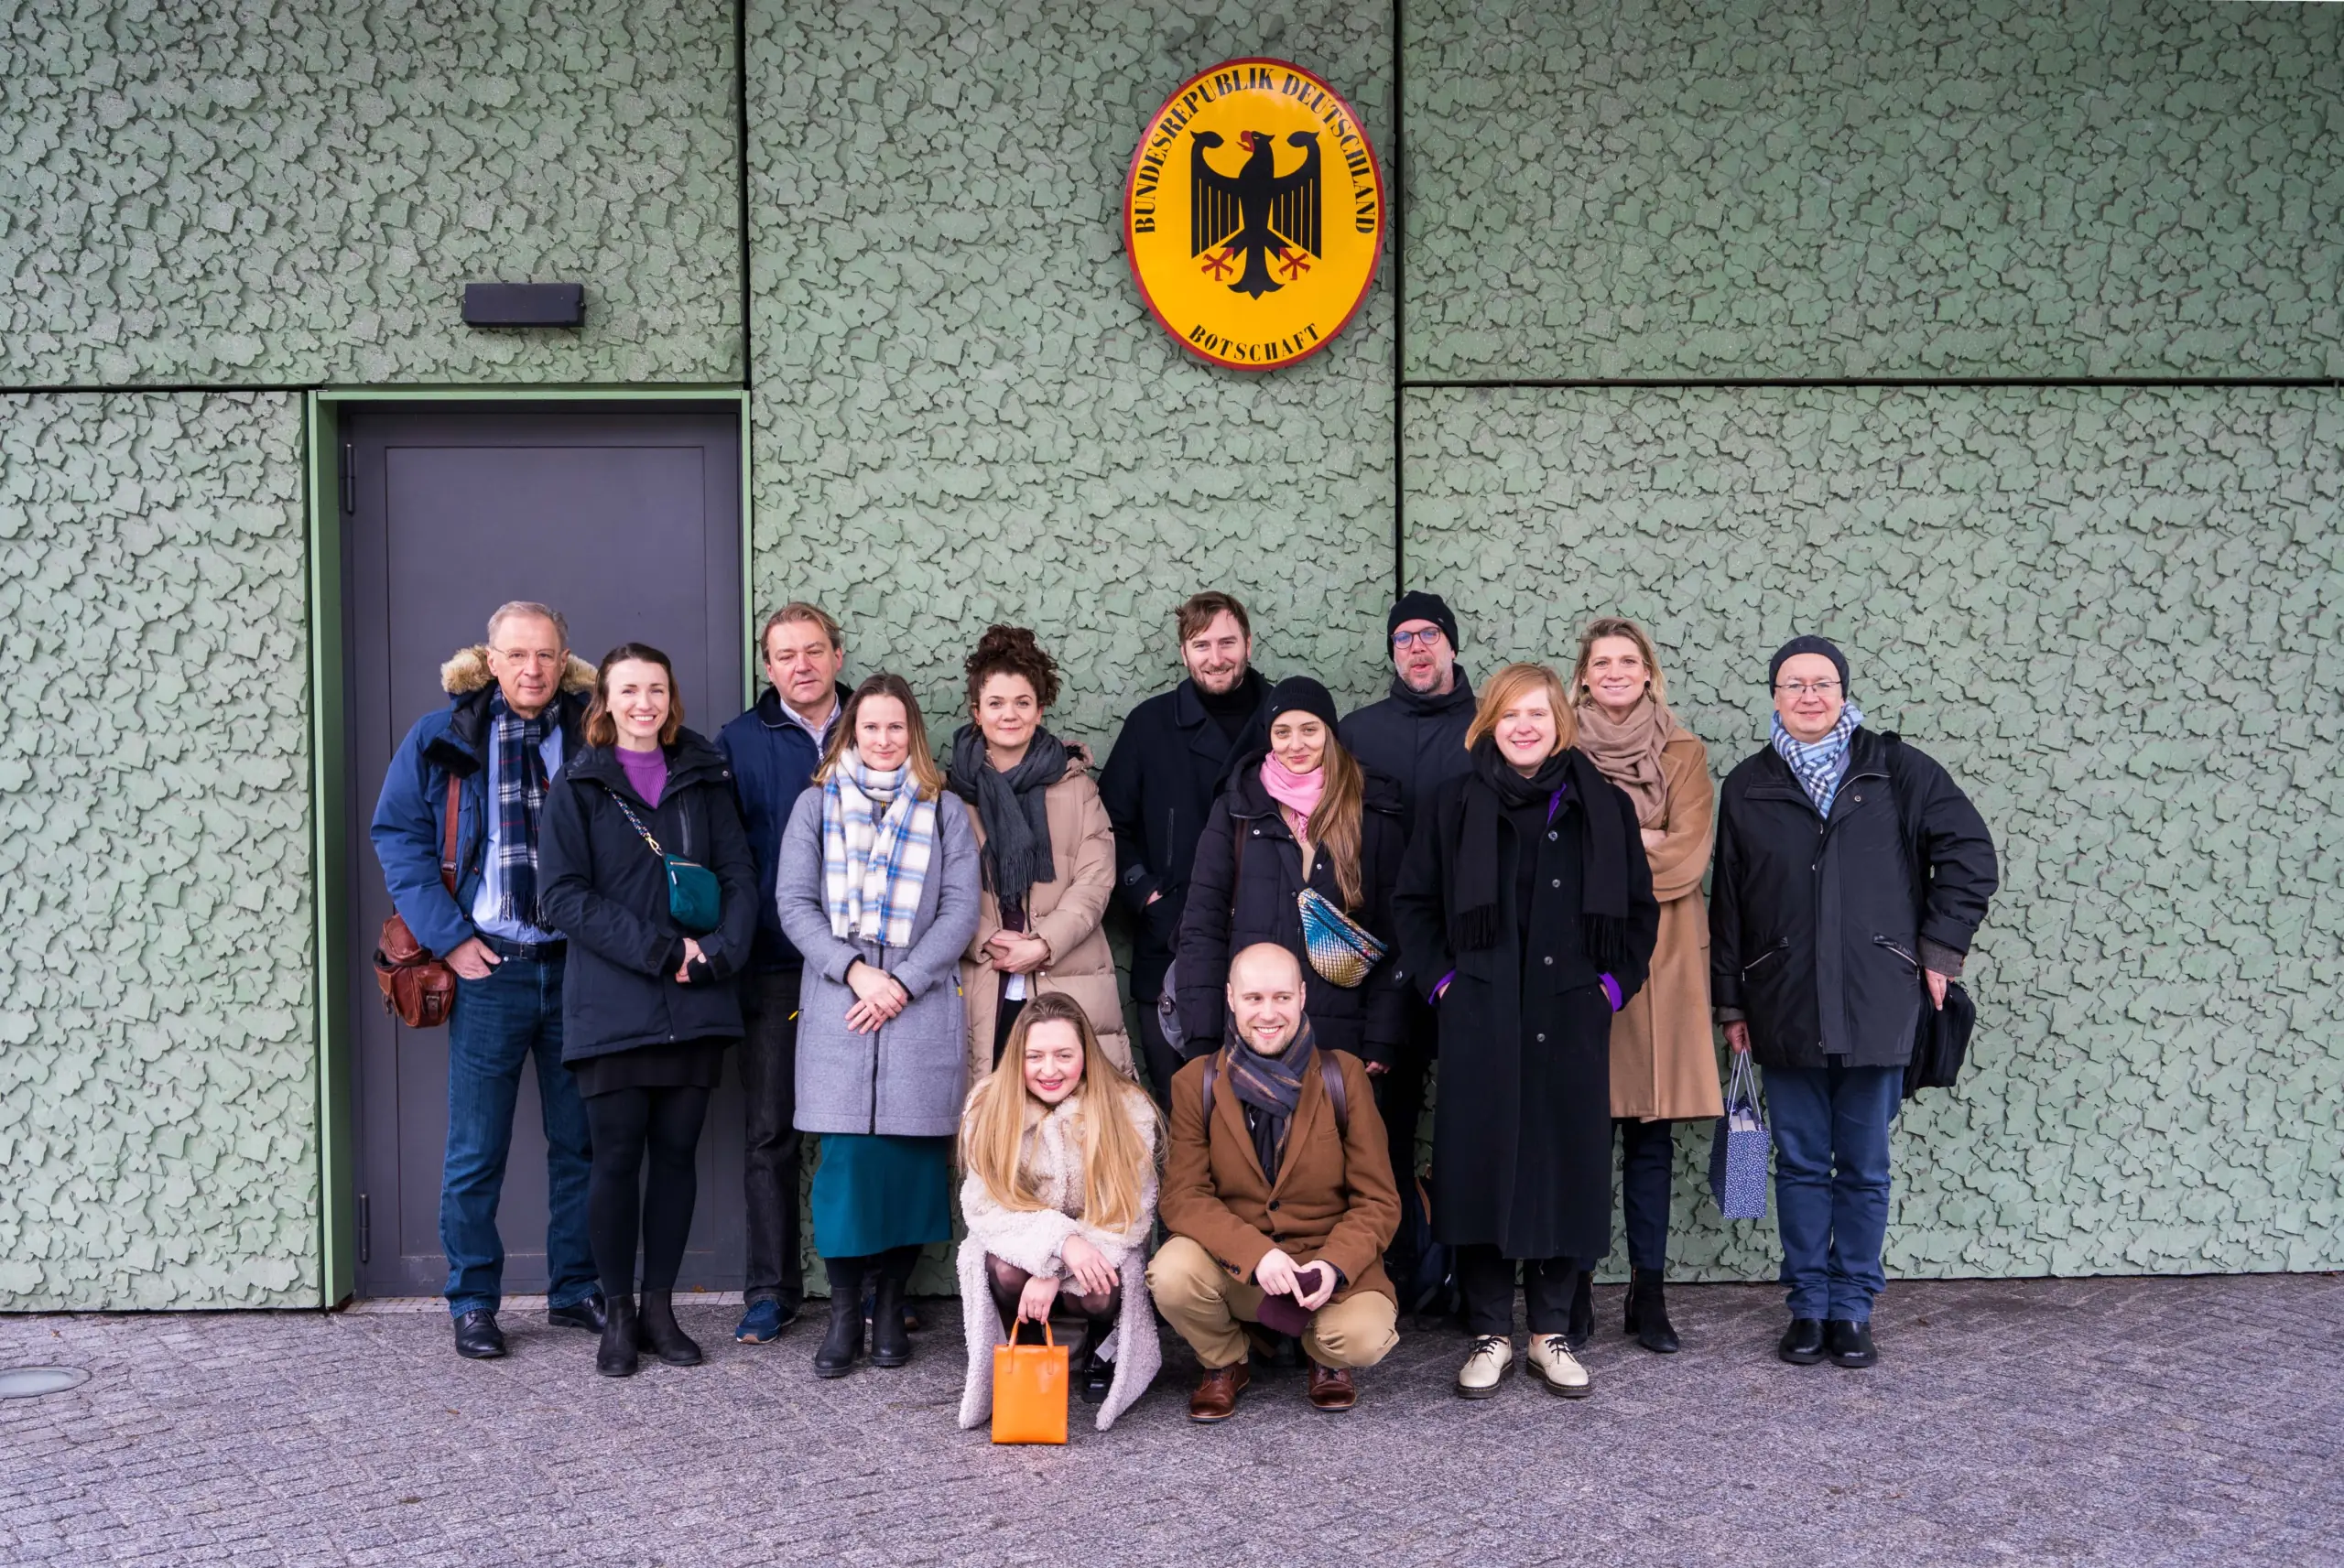 https://www.euki.de/wp-content/uploads/2023/02/22_030_Transforming-Societies_-Participants-of-IJPs-German-Polish-Bursary-at-a-conference-meeting-in-Warsaw-Poland.-cMarta-Thor-scaled